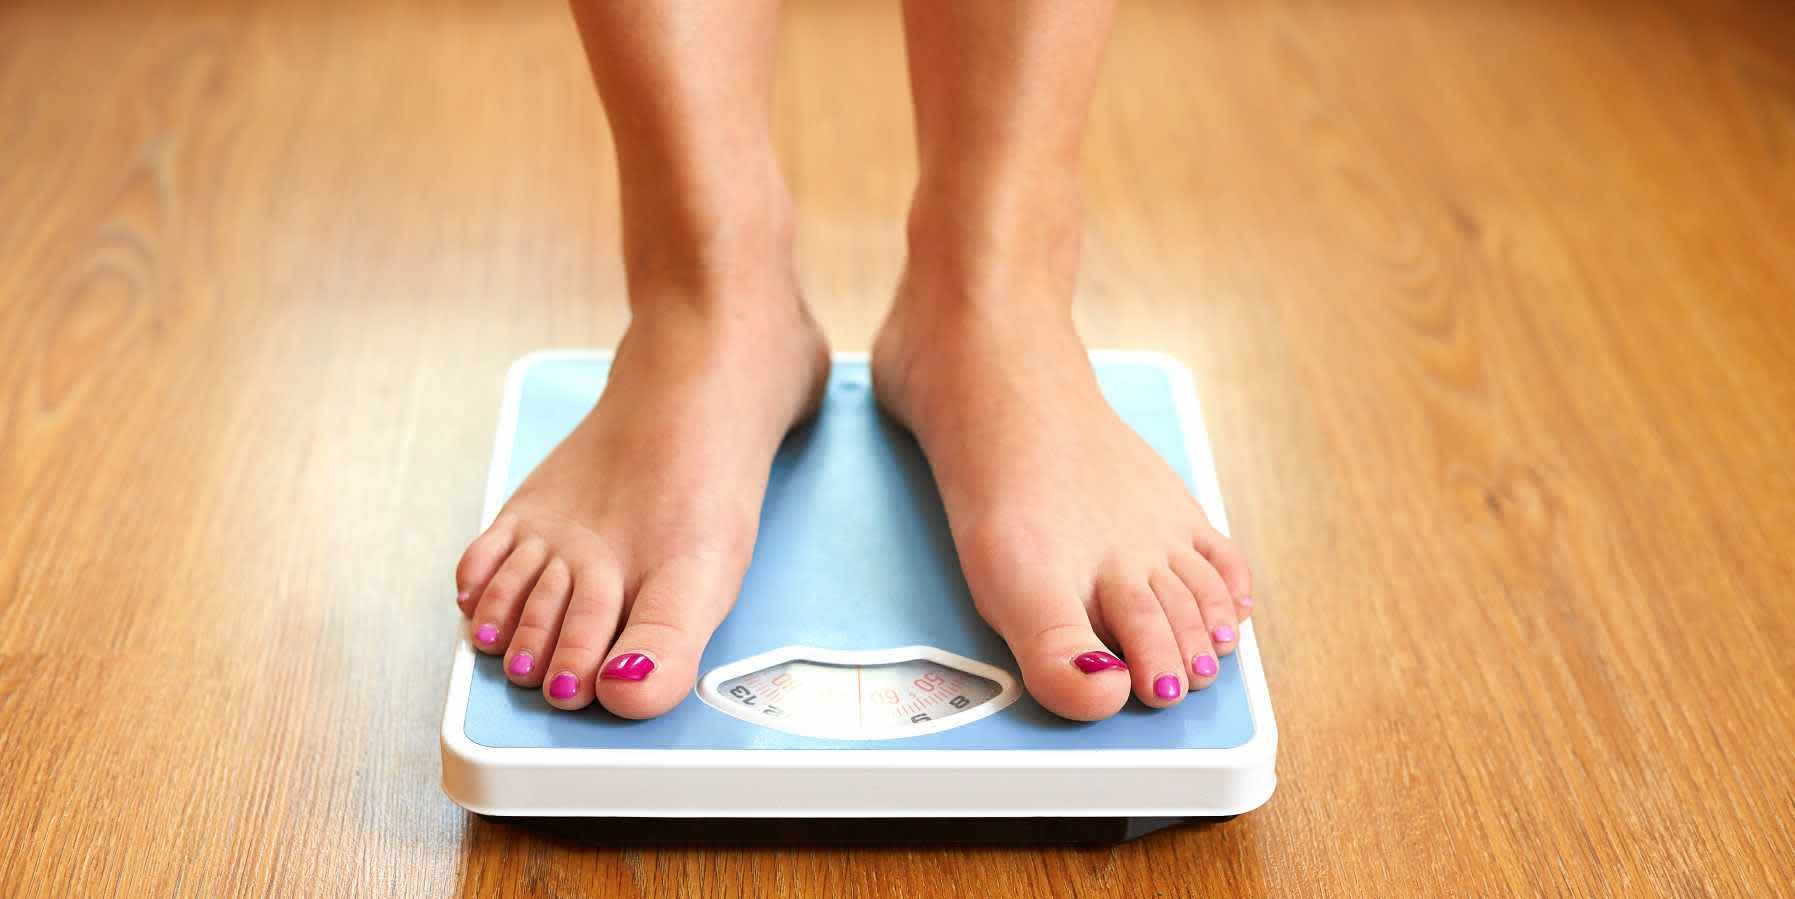 Person standing on bathroom scale while wondering how to maintain weight loss